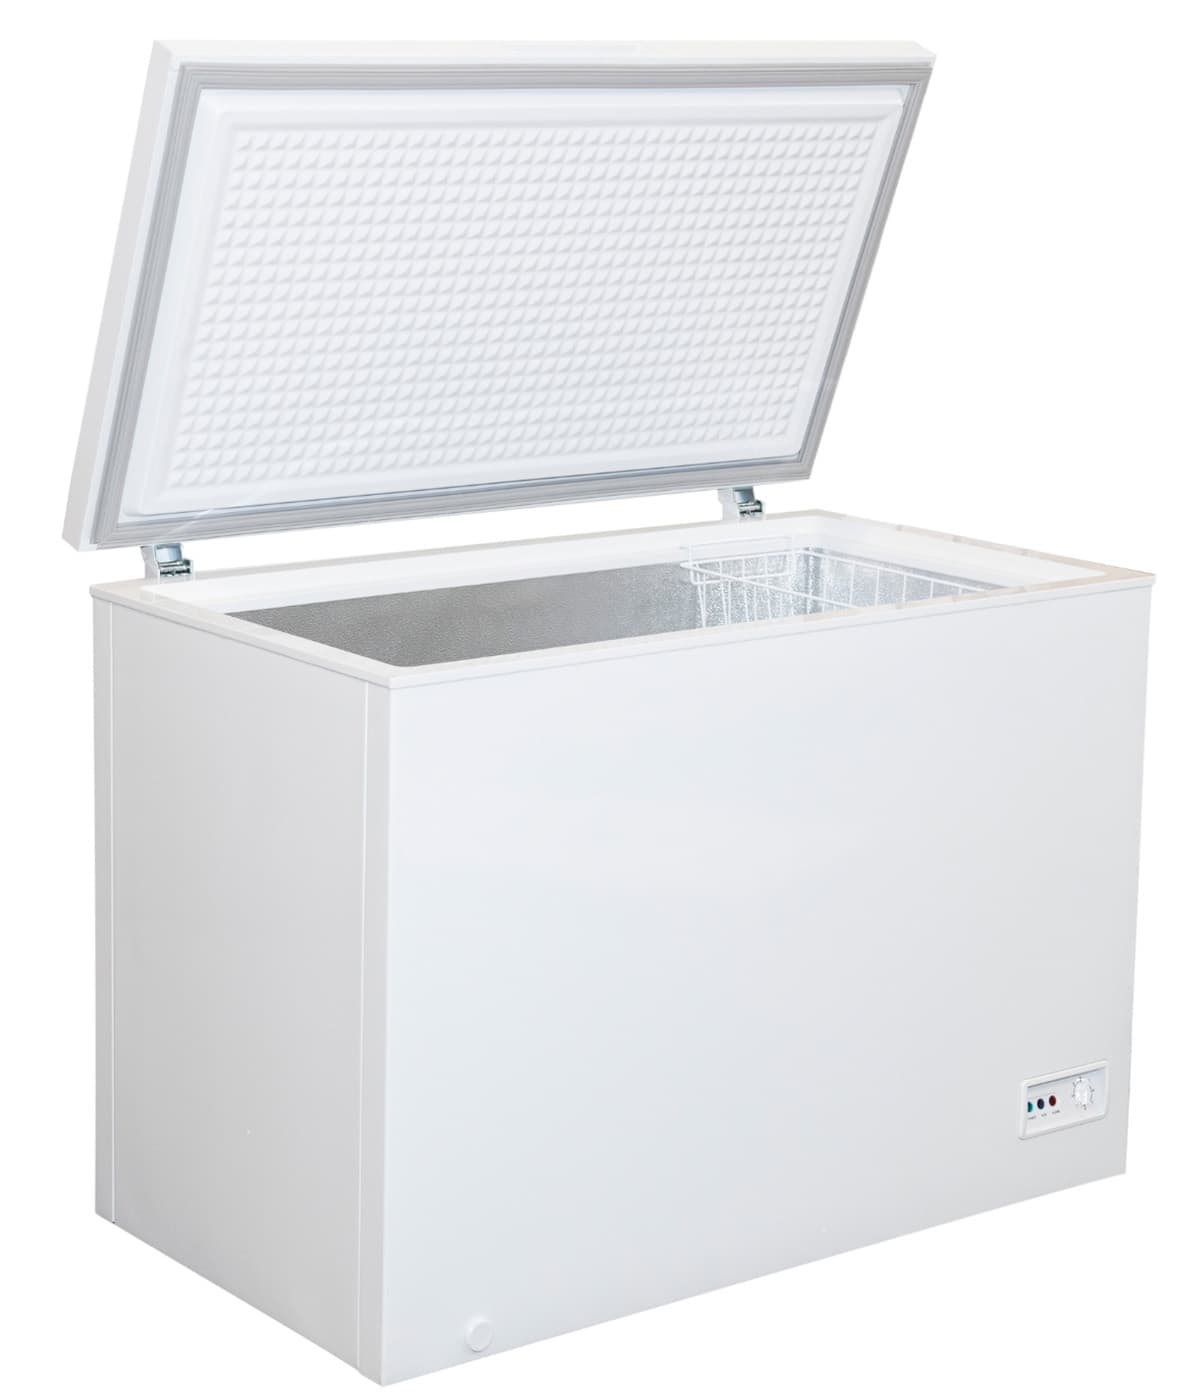 A white chest freezer with the door standing open.